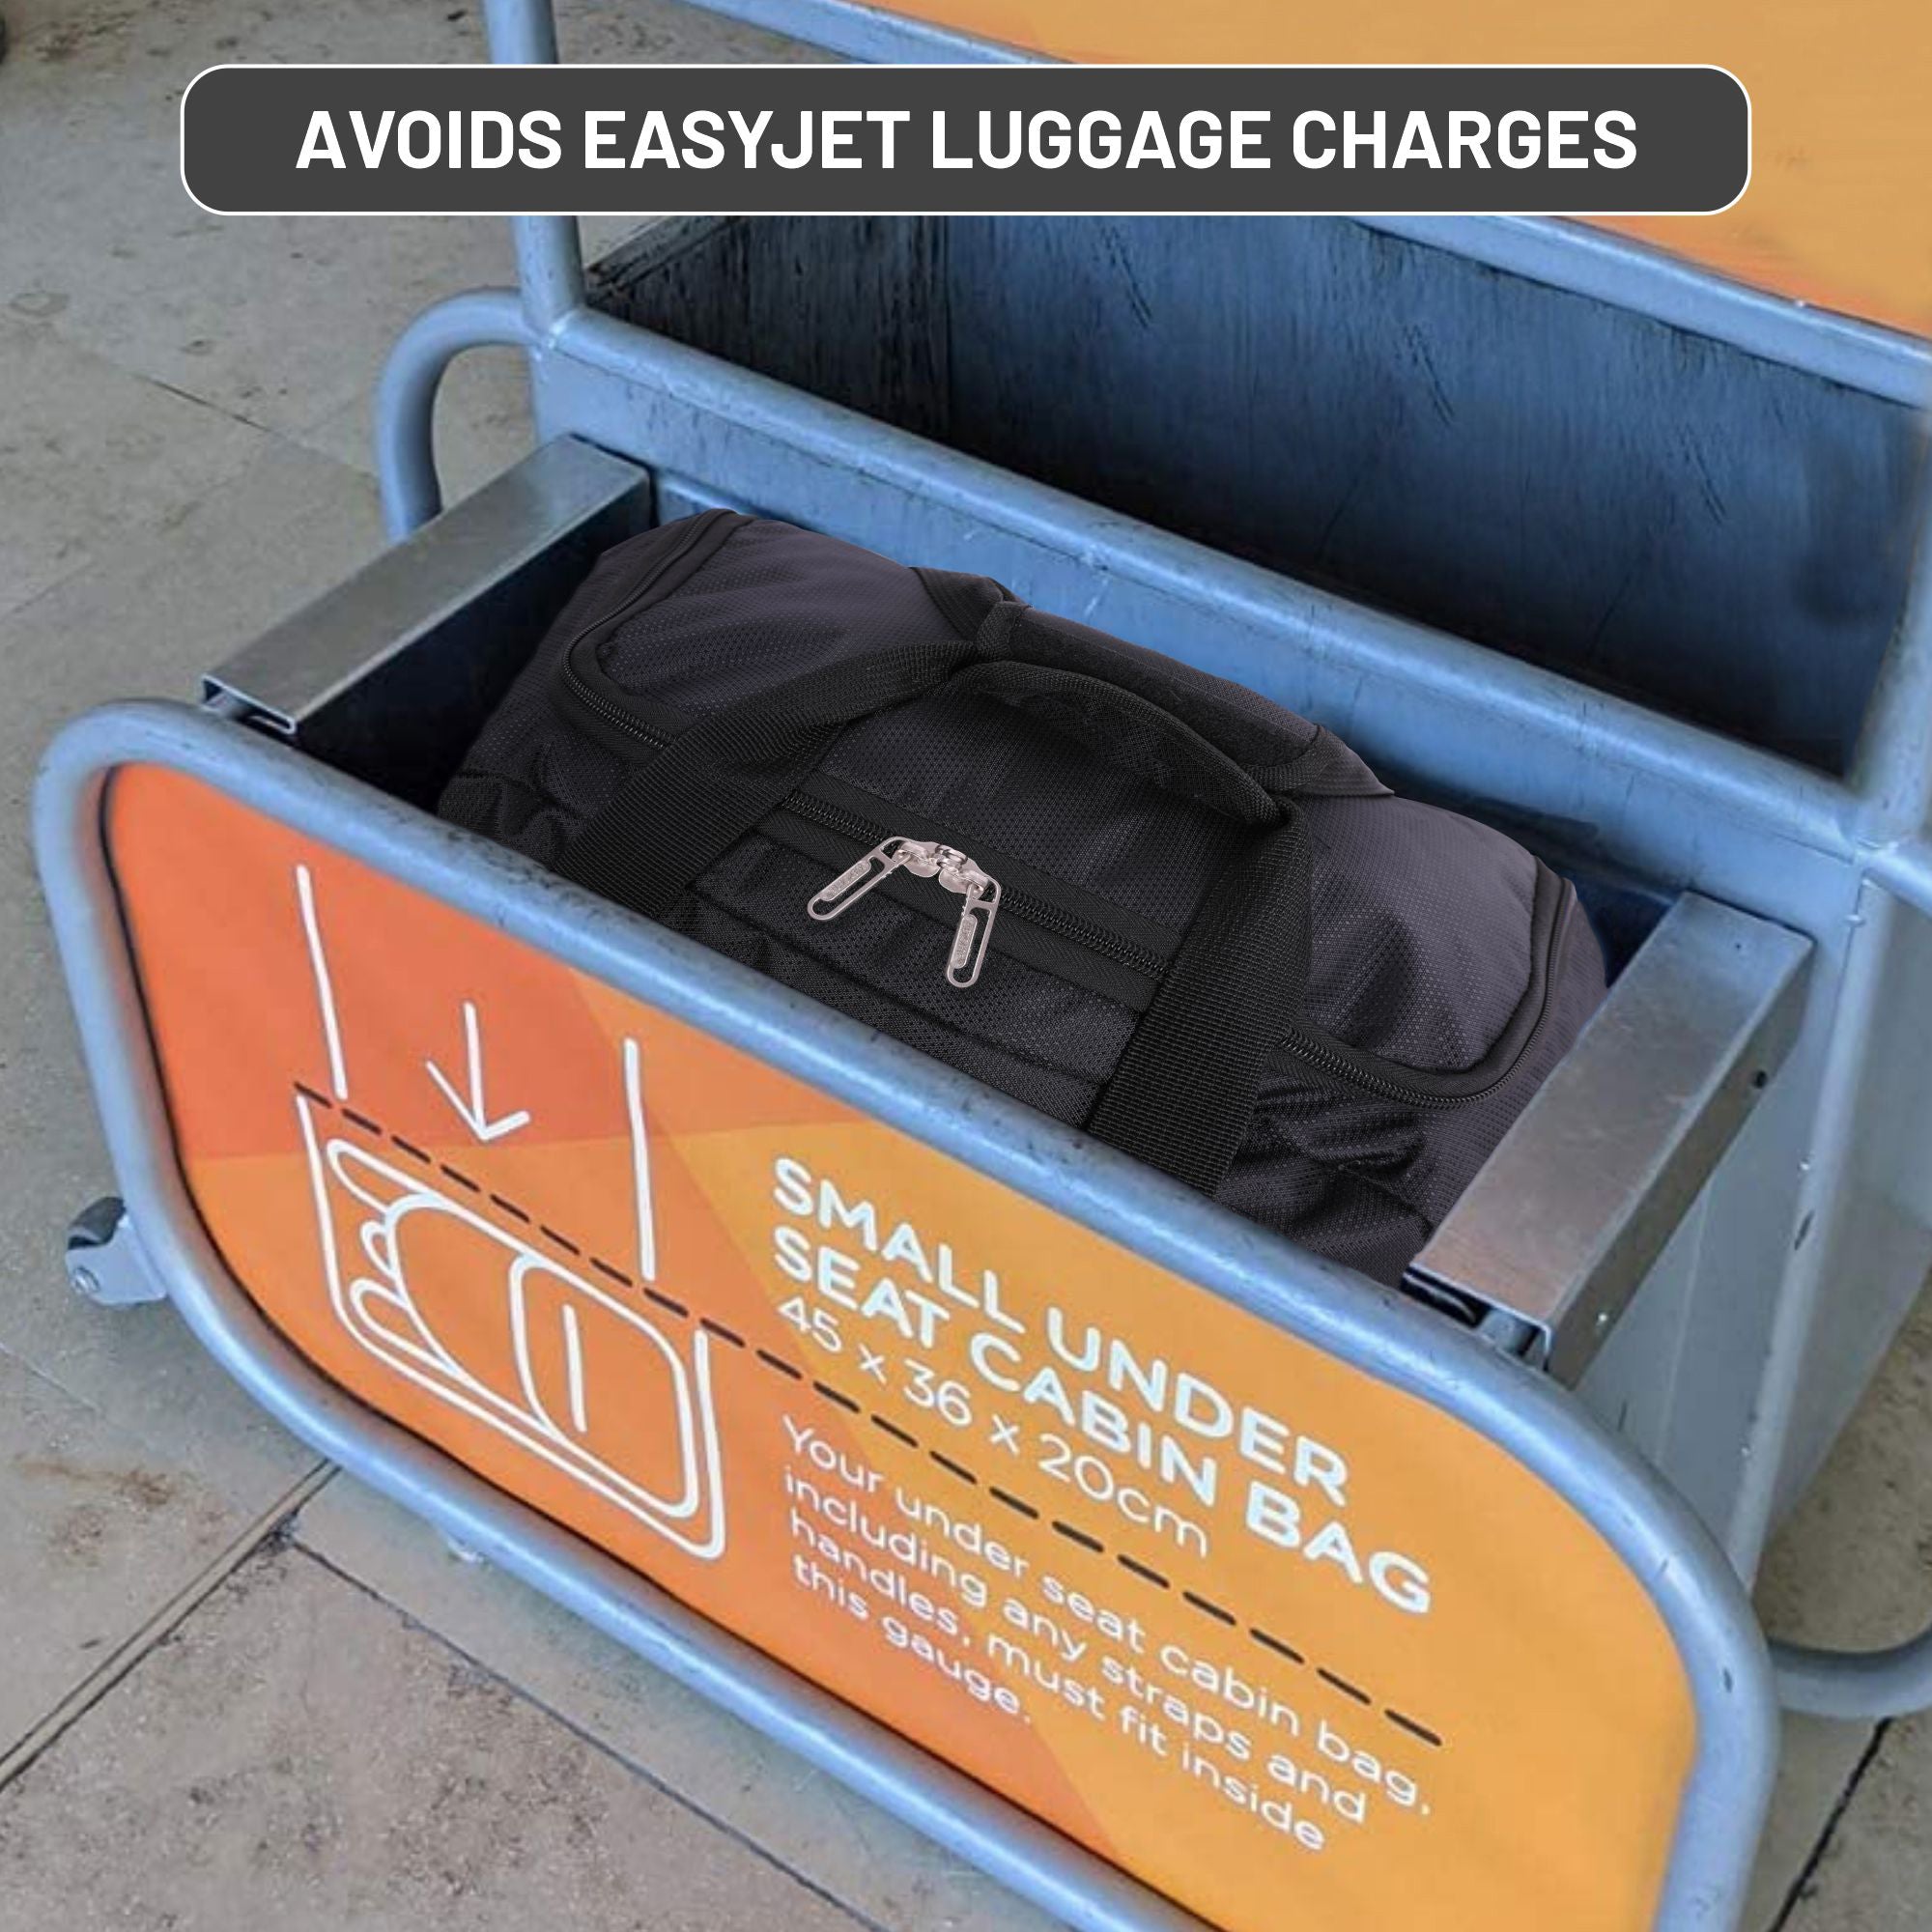 Aerolite easyJet Carry On Under Seat Cabin Luggage Trolley Bag Suitcase  28L, Fits easyJet Hand Cabin Luggage 45x36x20